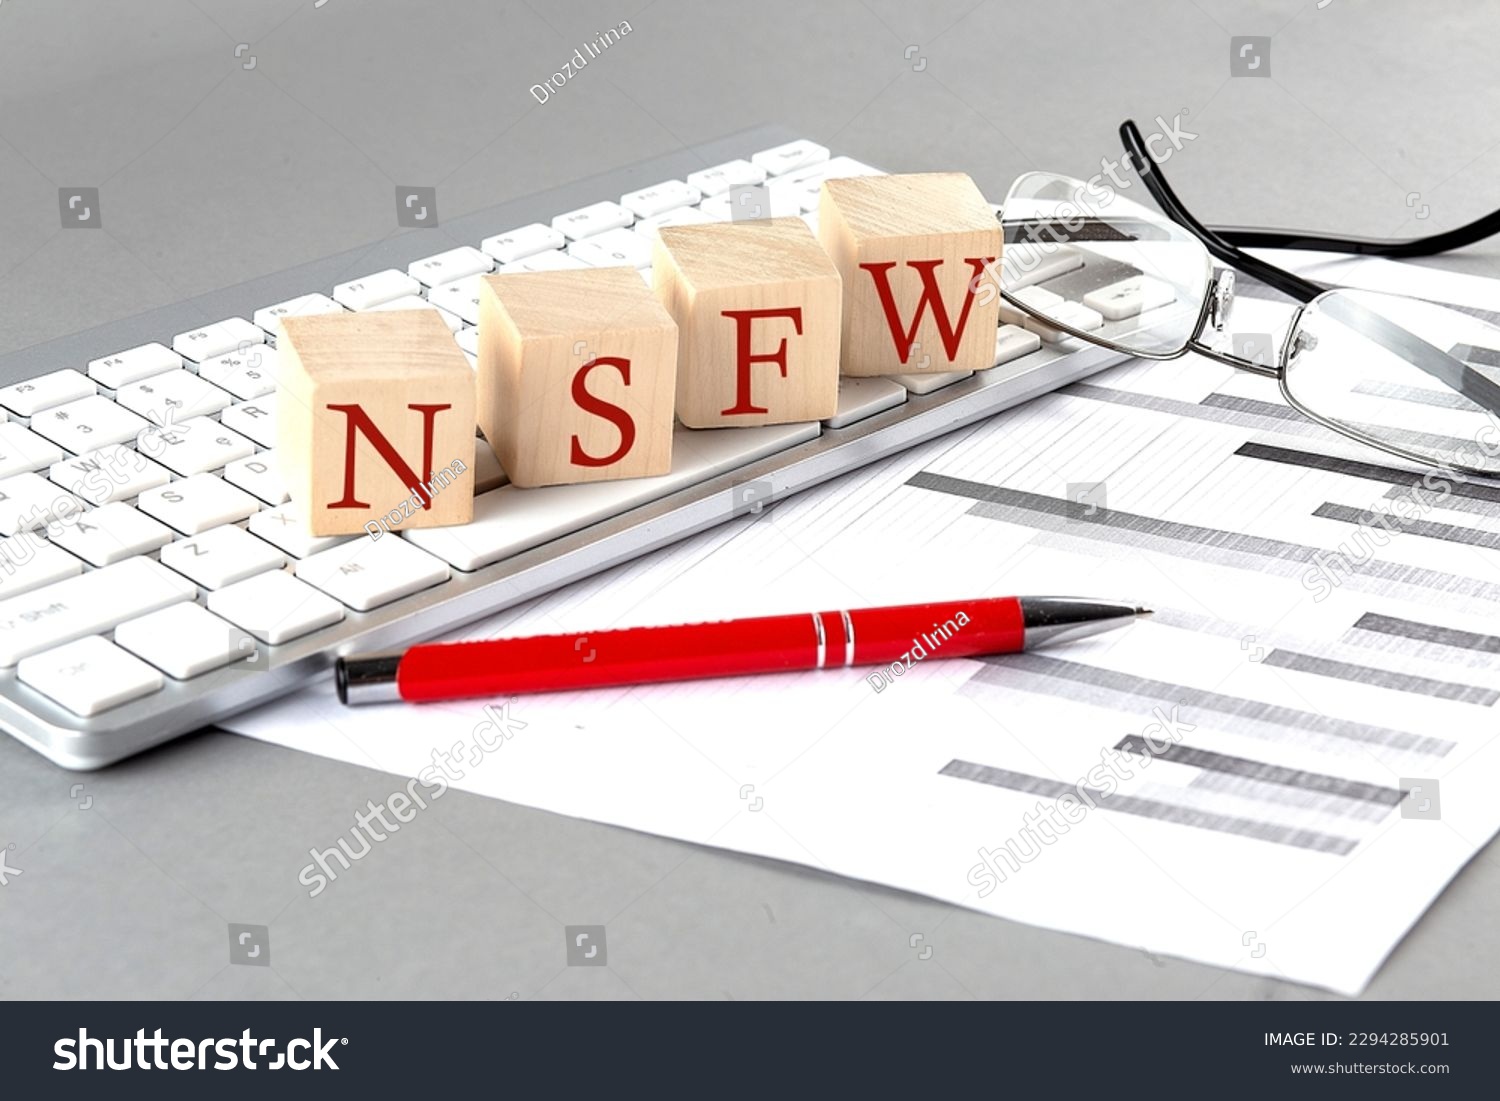 NSFW written on wooden cube on the keyboard with chart on grey background #2294285901